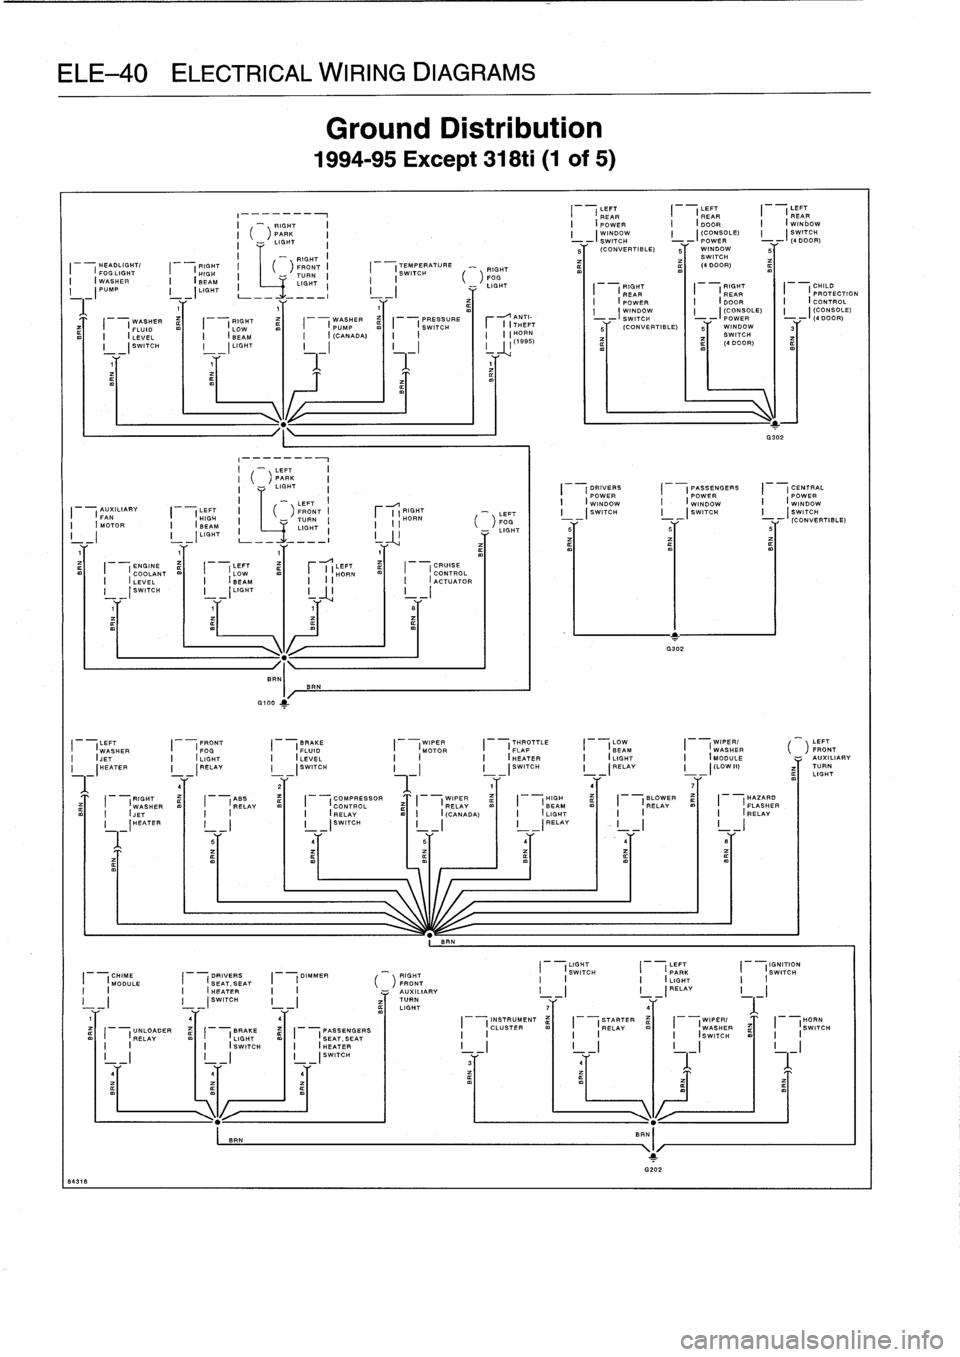 BMW 318i 1997 E36 Owners Manual 
ELE-40
ELECTRICAL
WIRING
DIAGRAMS

RIGHTHEADLIGHT/

	

RIGHT
I

	

FRONT
I

	

FOG
LIGHT

	

I

	

HIGH

	

I

	

TURN
I

	

I
WASHER

	

I

	

I
BEAM

	

LIGHT
I
(PUMP

	

I
(LIGHT
,
L-
1

	

1

	

